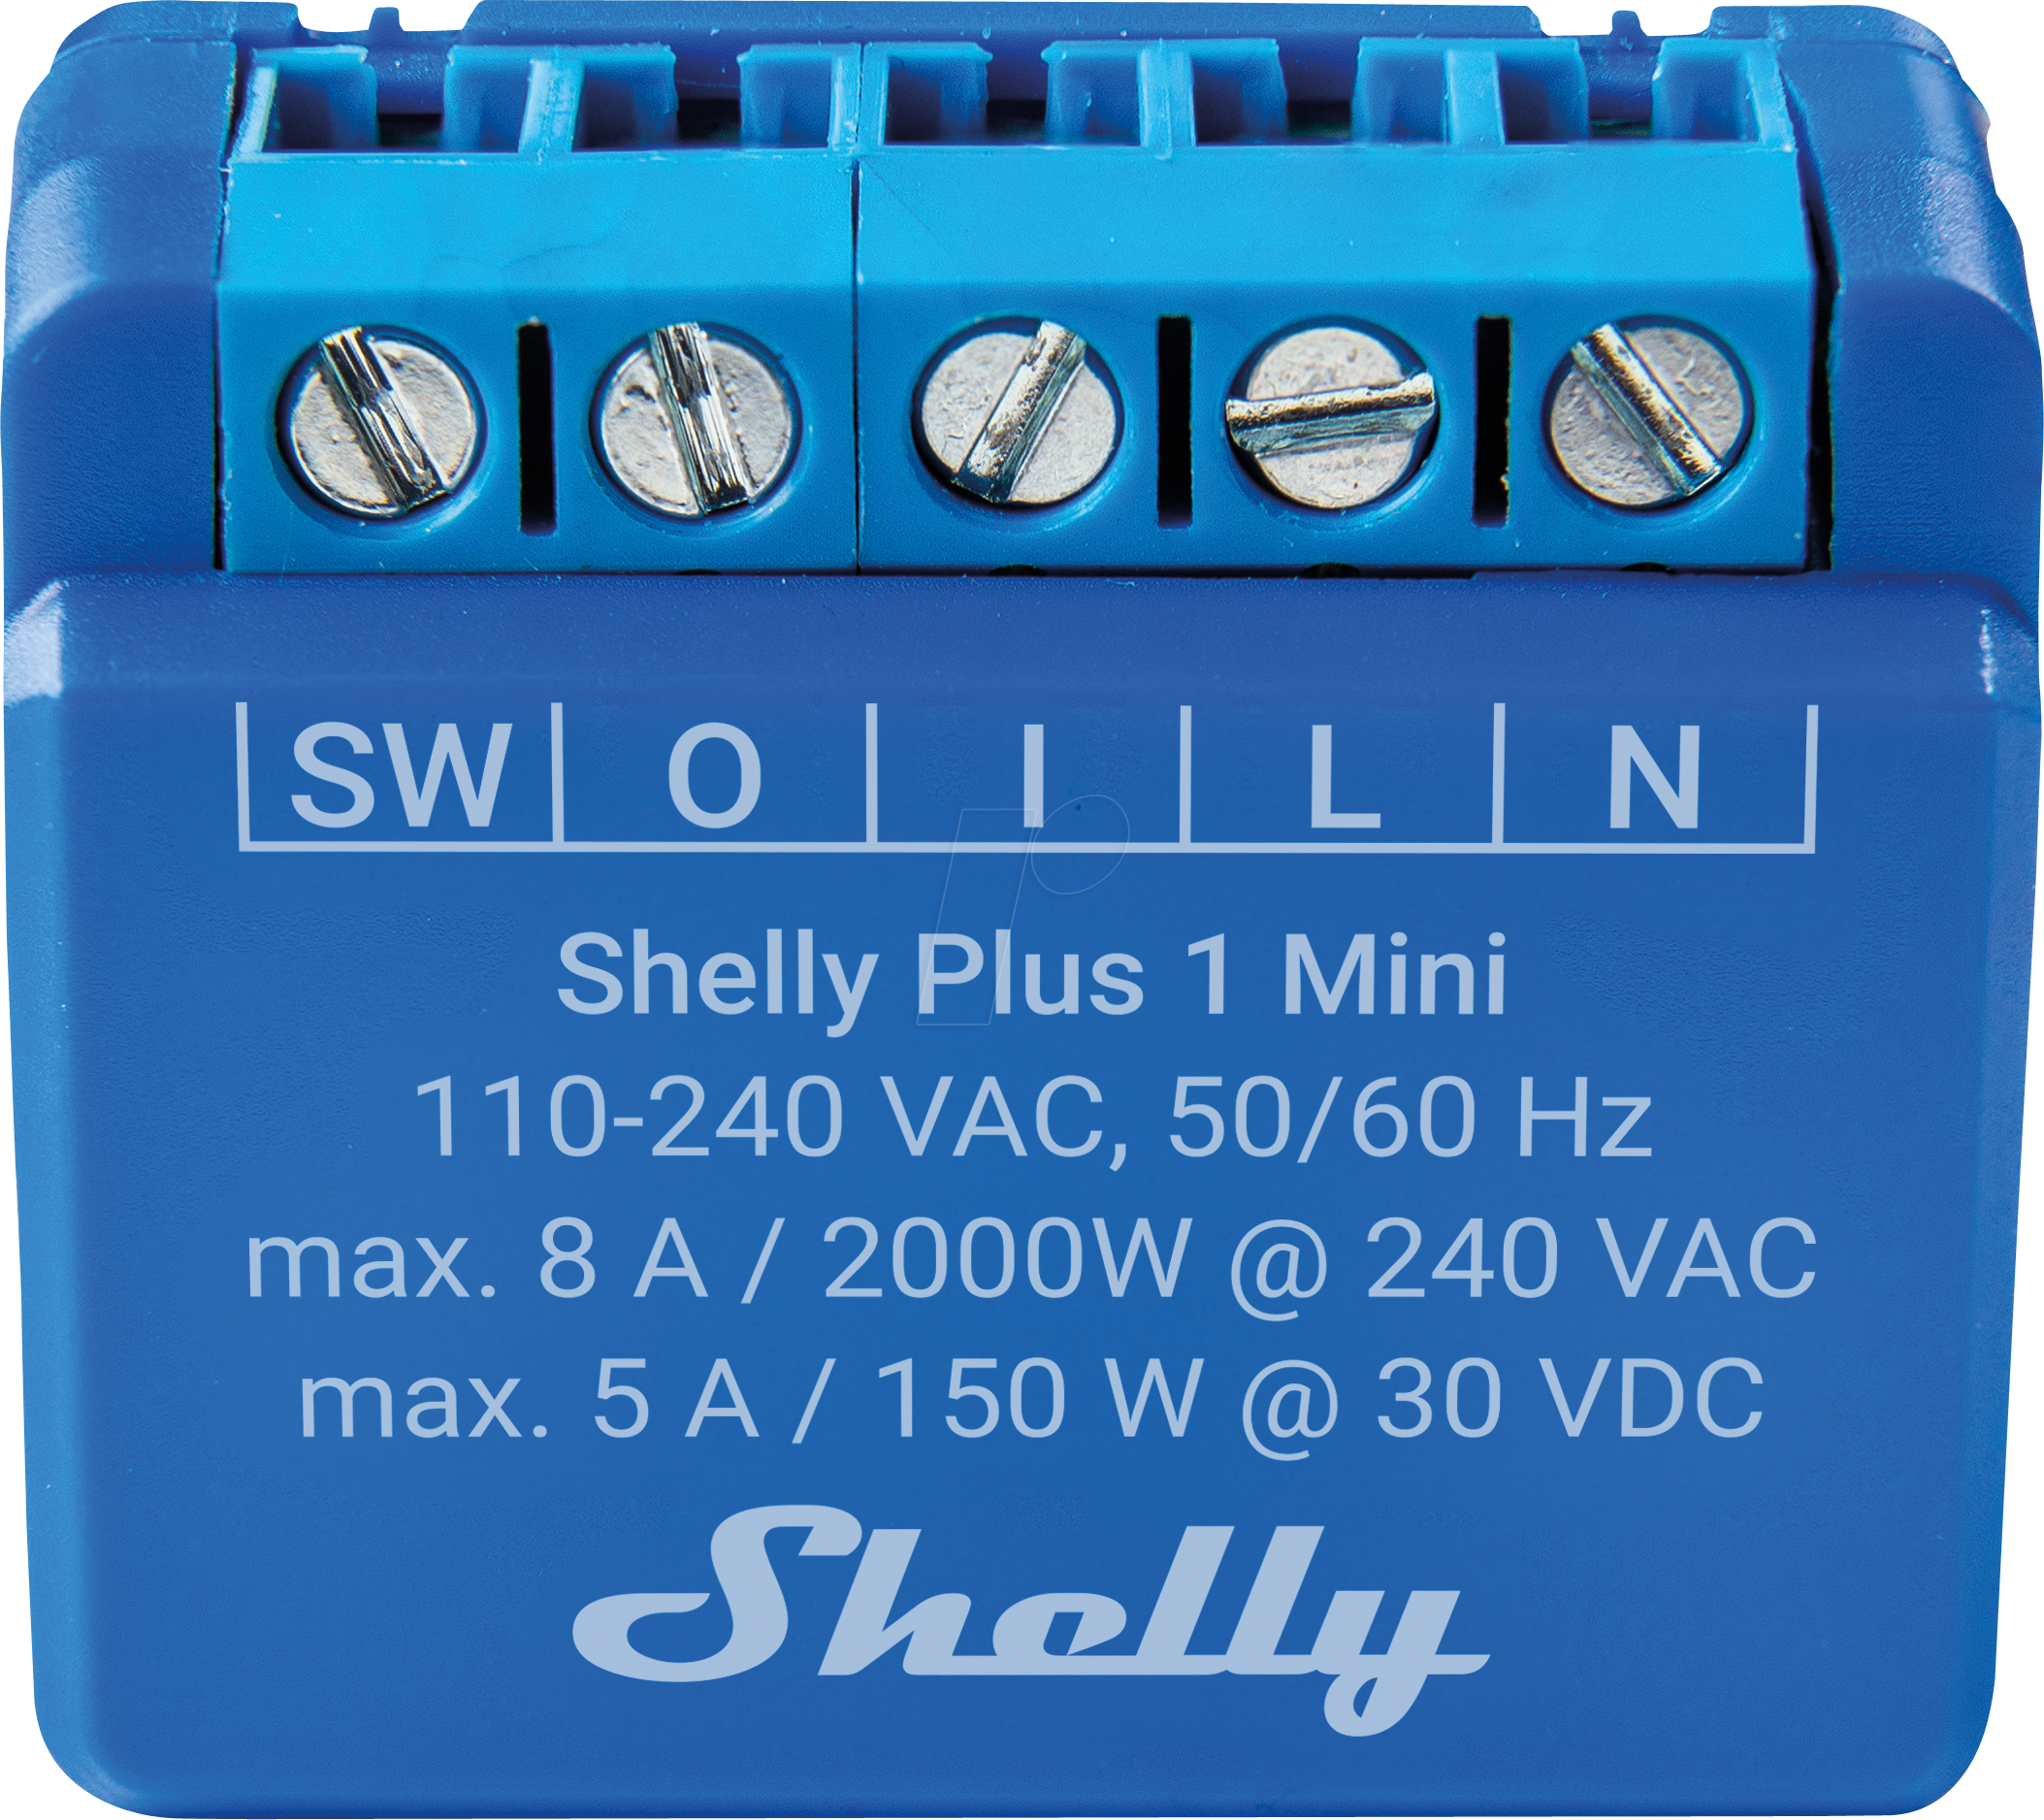 SHELLY PLUS 1M: Shelly Plus 1 Mini, 1 canale, WLAN, Bluetooth, max